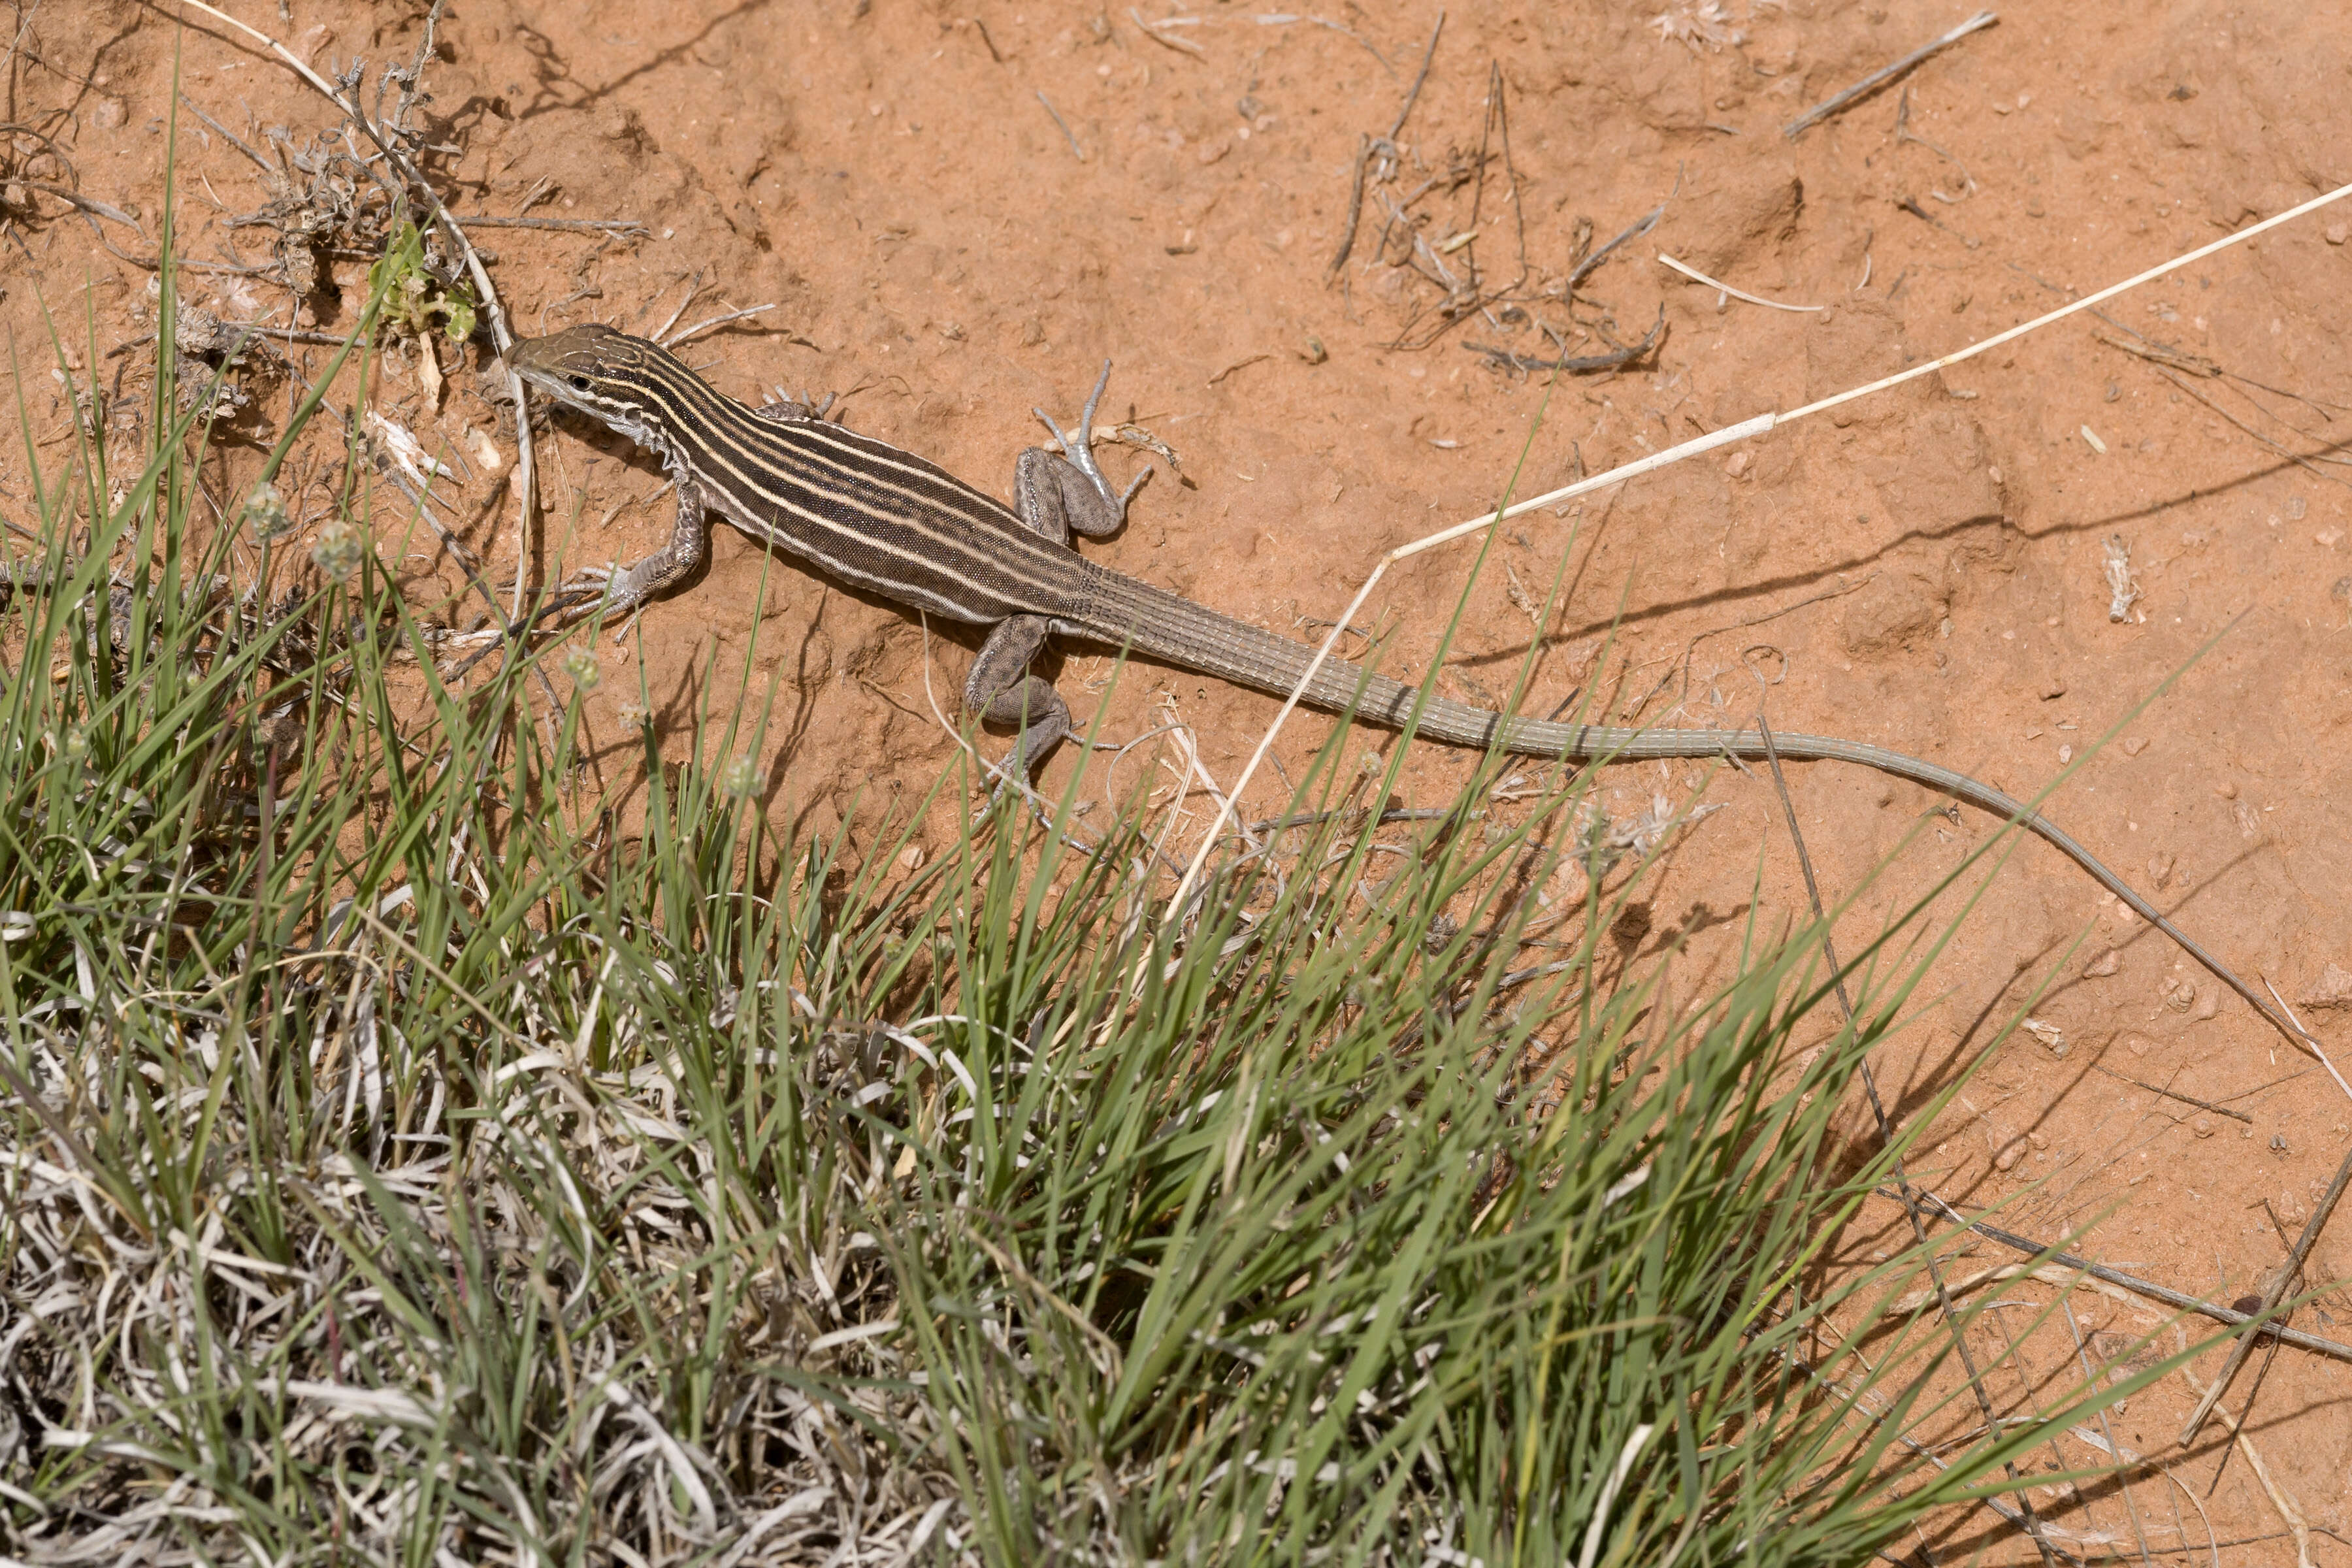 Image of Plateau Striped Whiptail